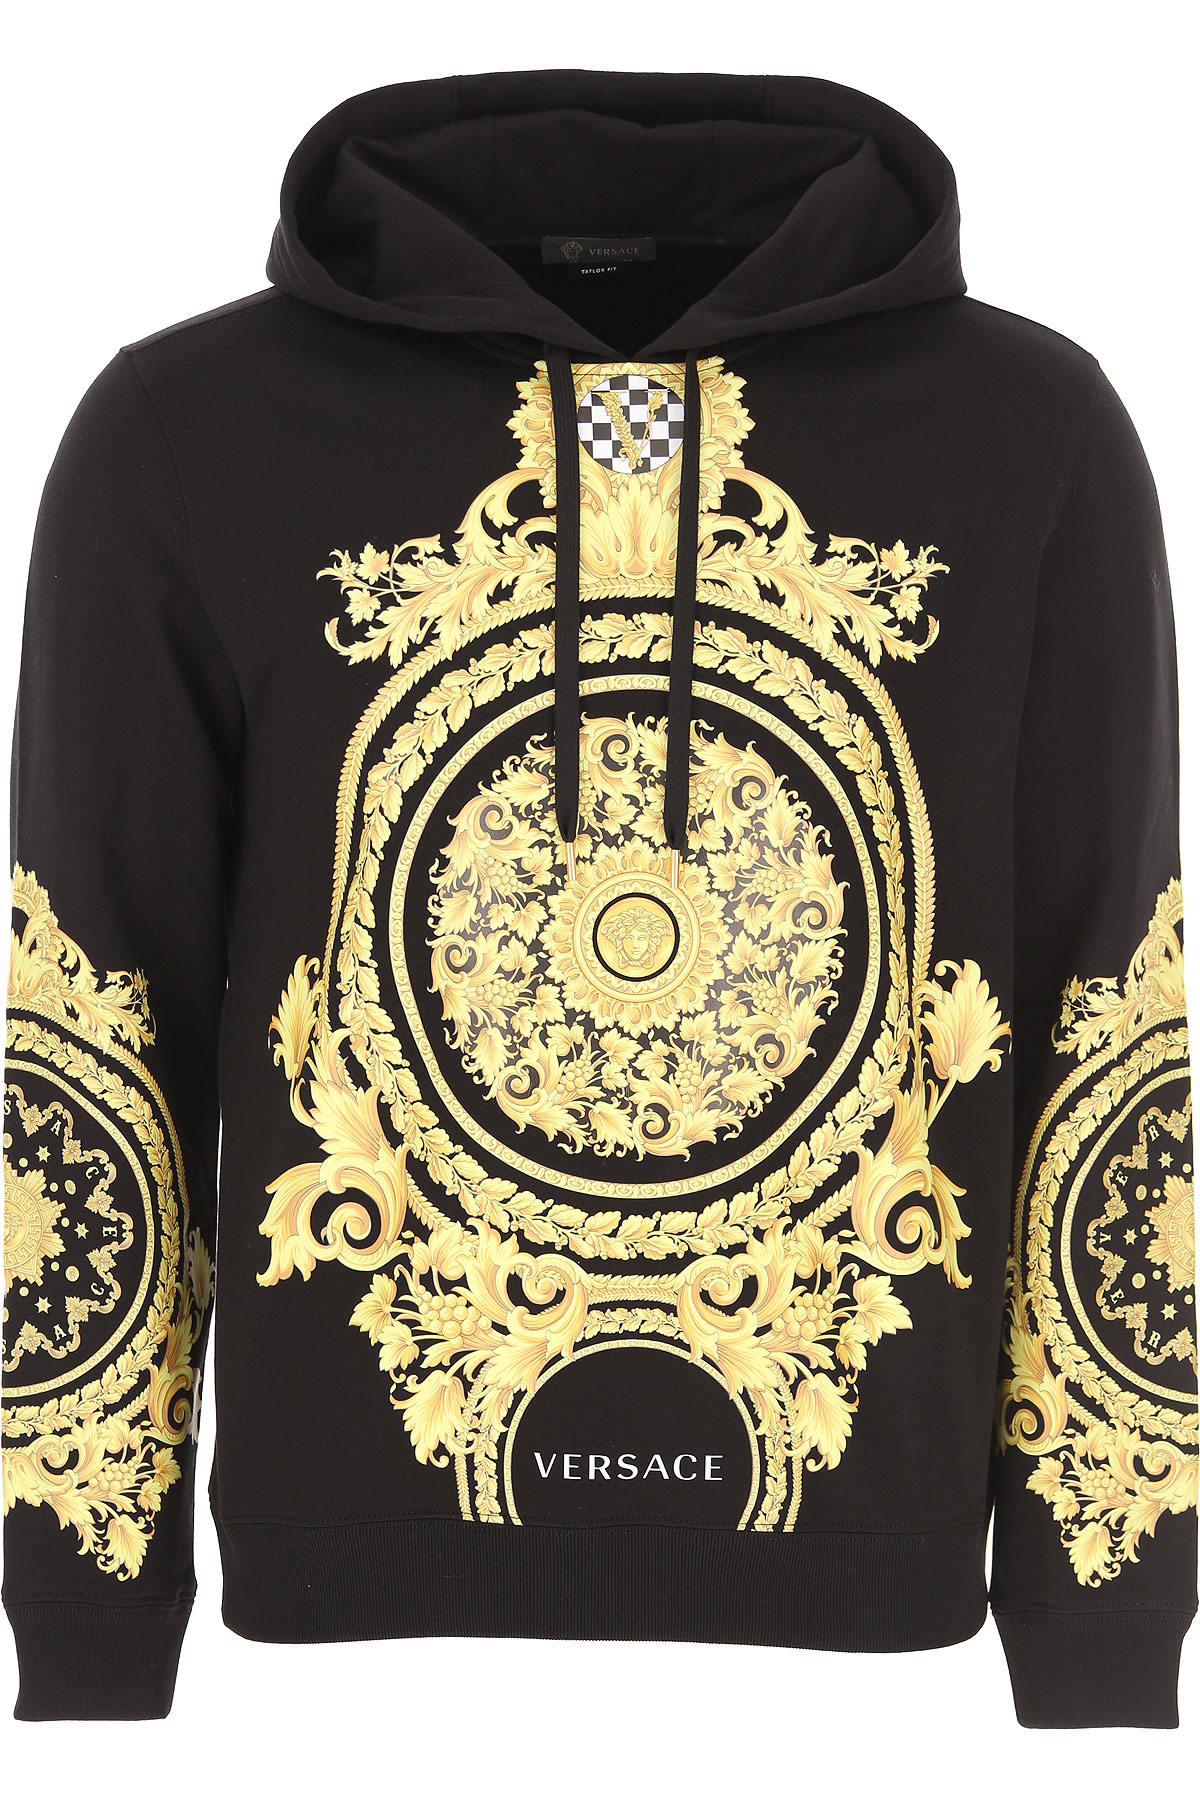 Mens Clothing Versace, Style code: a85346-a231242-a2003